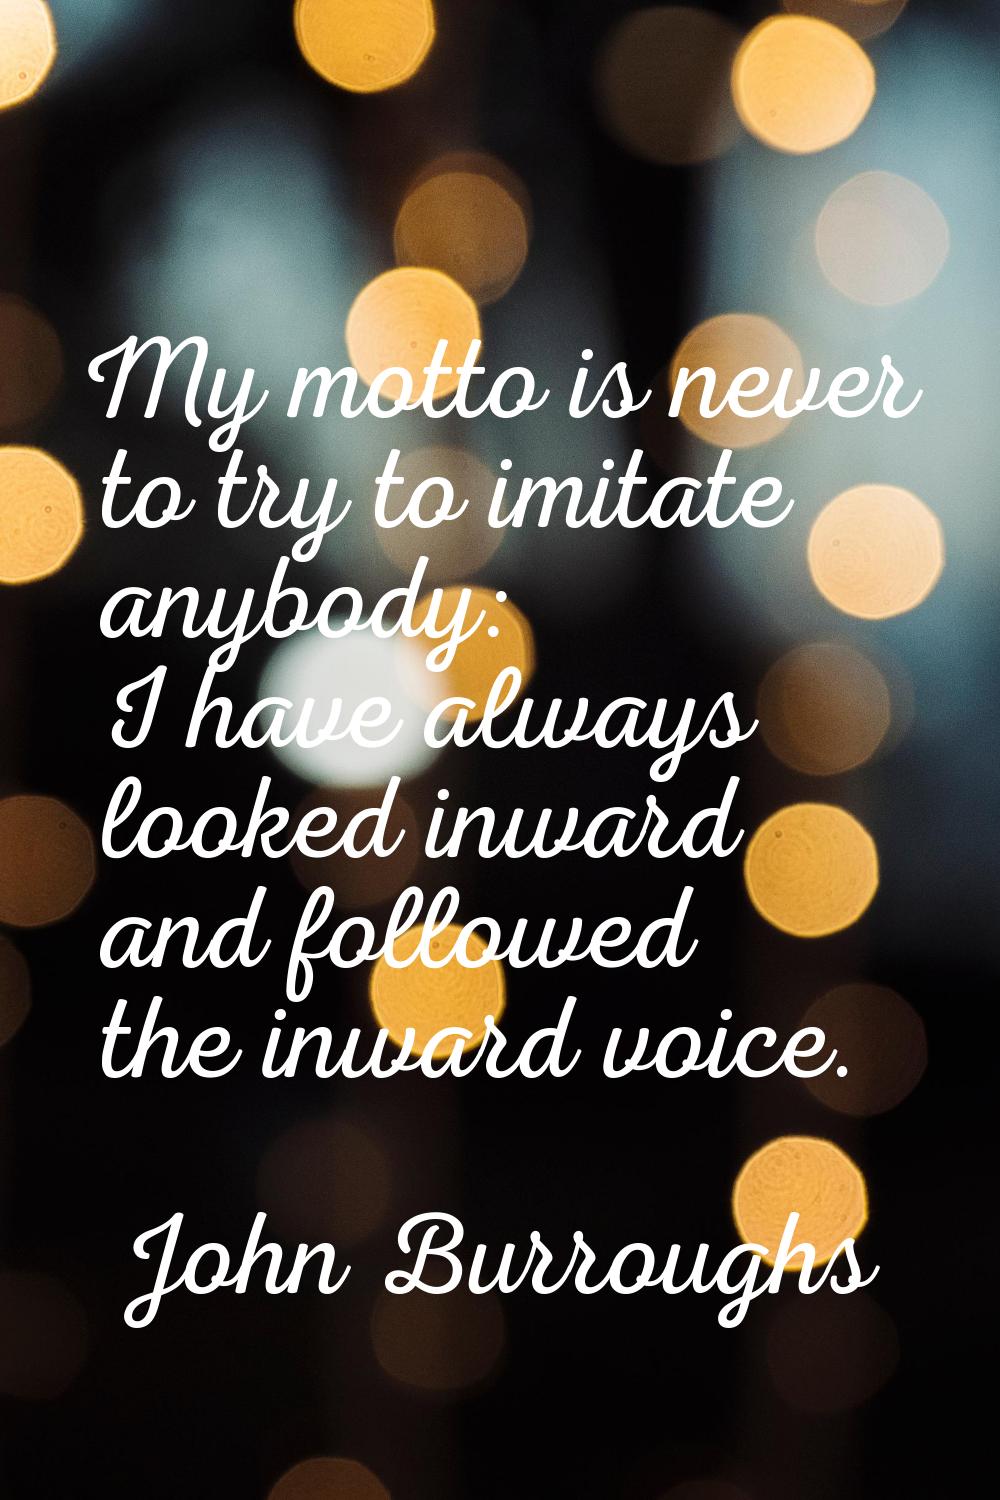 My motto is never to try to imitate anybody: I have always looked inward and followed the inward vo